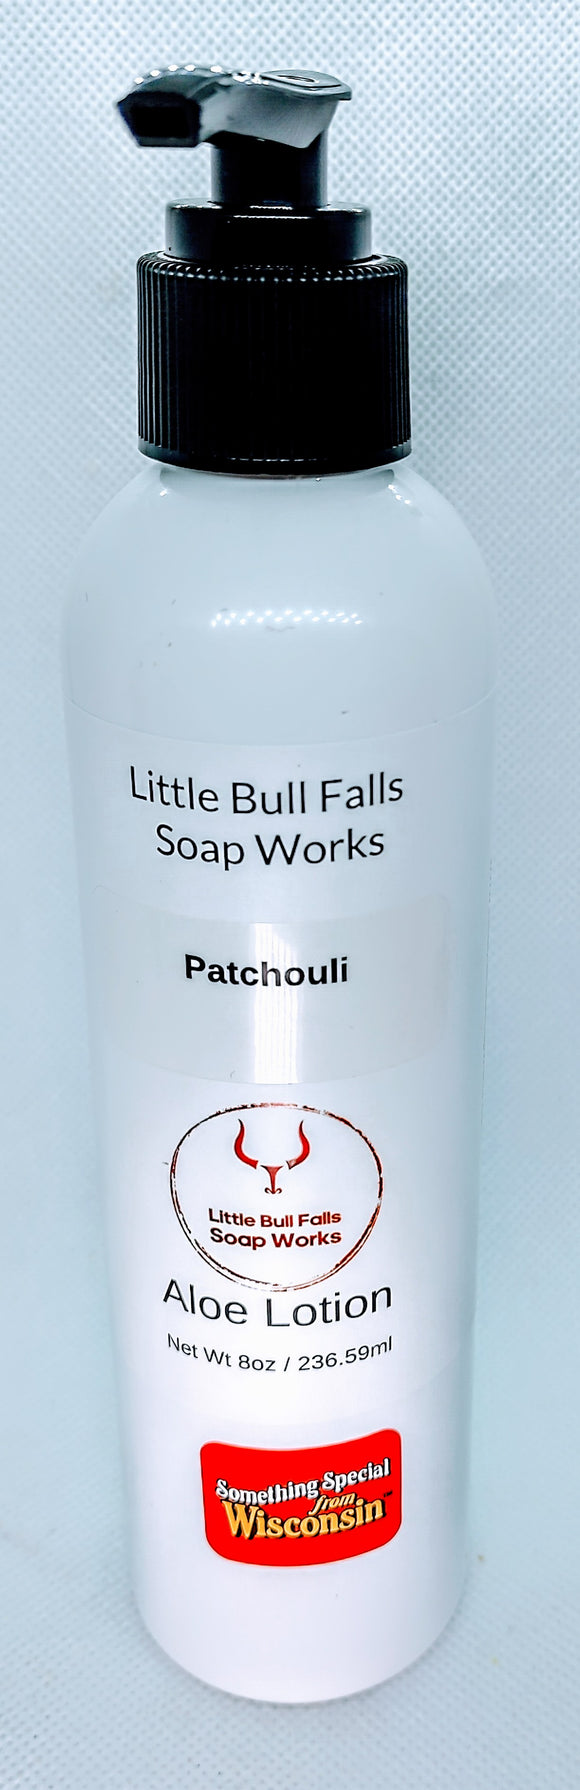 Patchouli hand body lotion. Hippy lotion. Lotion for men. Lotion for women.. Natural skincare. Skincare for men.